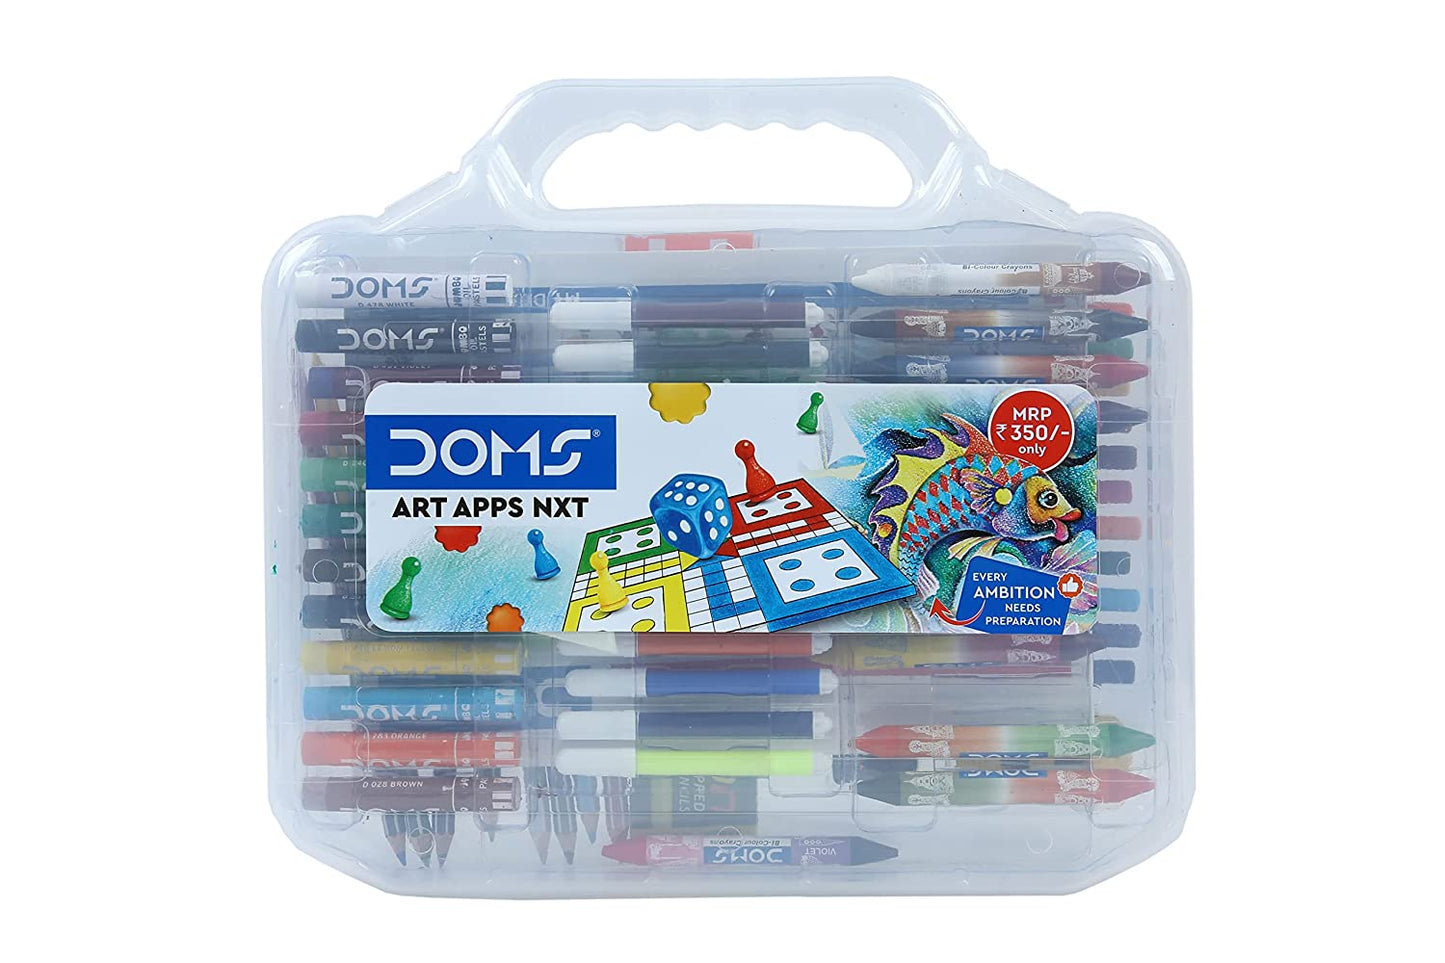 DOMS Gifting Range for Kids Art Apps NXT Kit with Plastic Carry Case- Multicolour (DM7483)